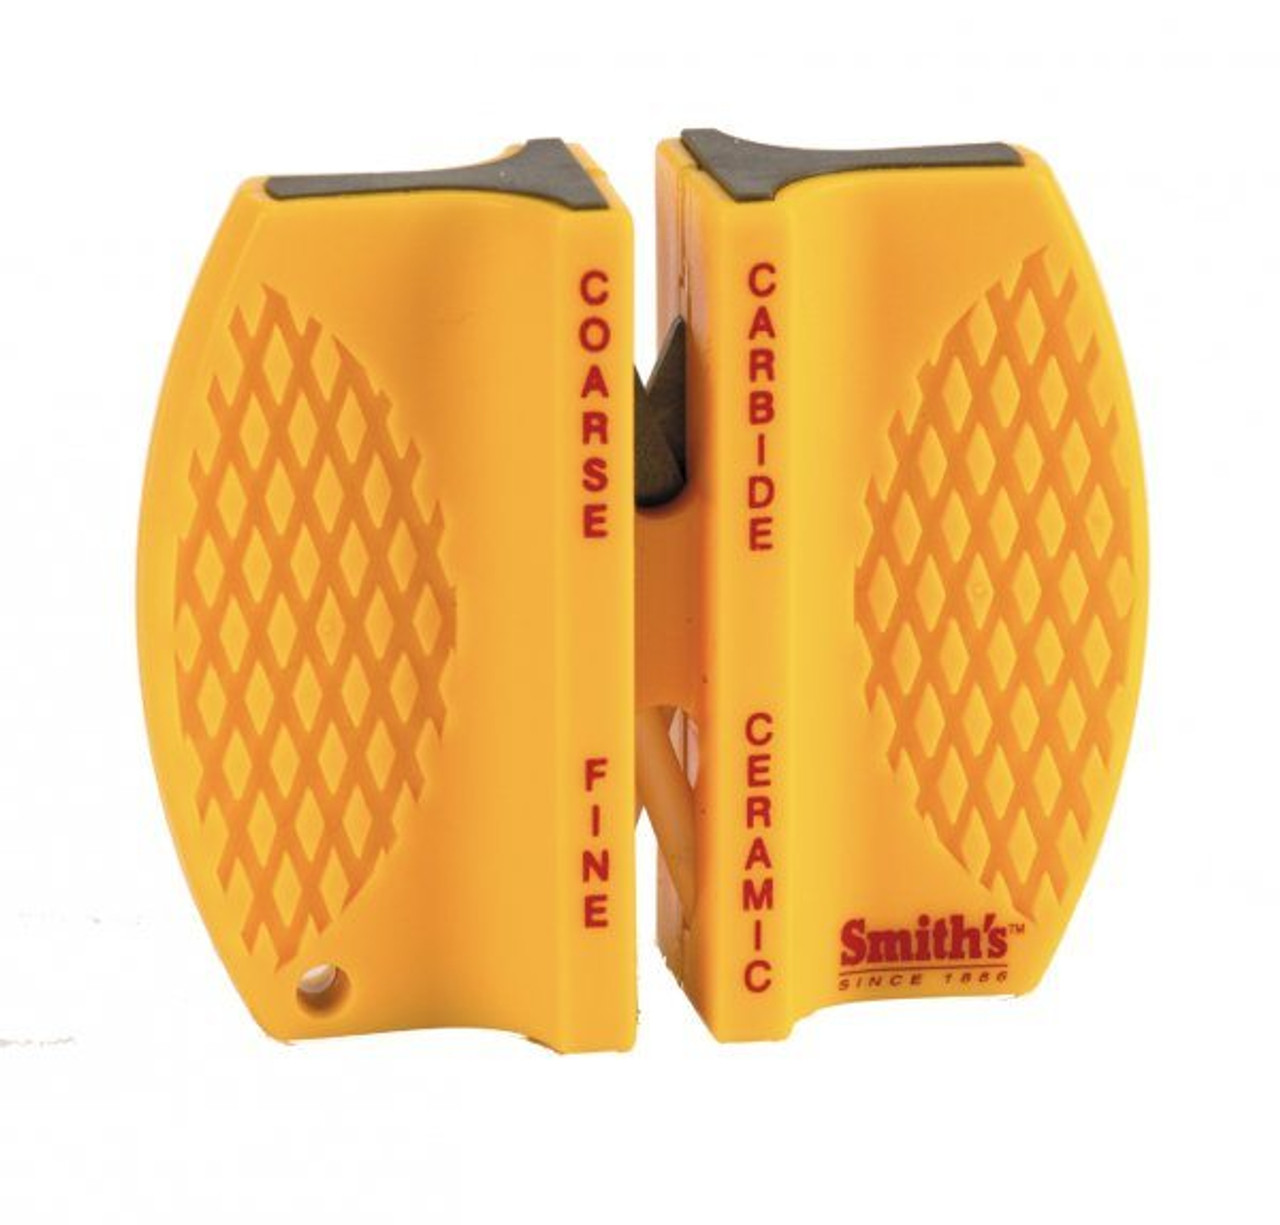 Smith's Pocket Pal Knife Sharpener - Nexgen Outfitters